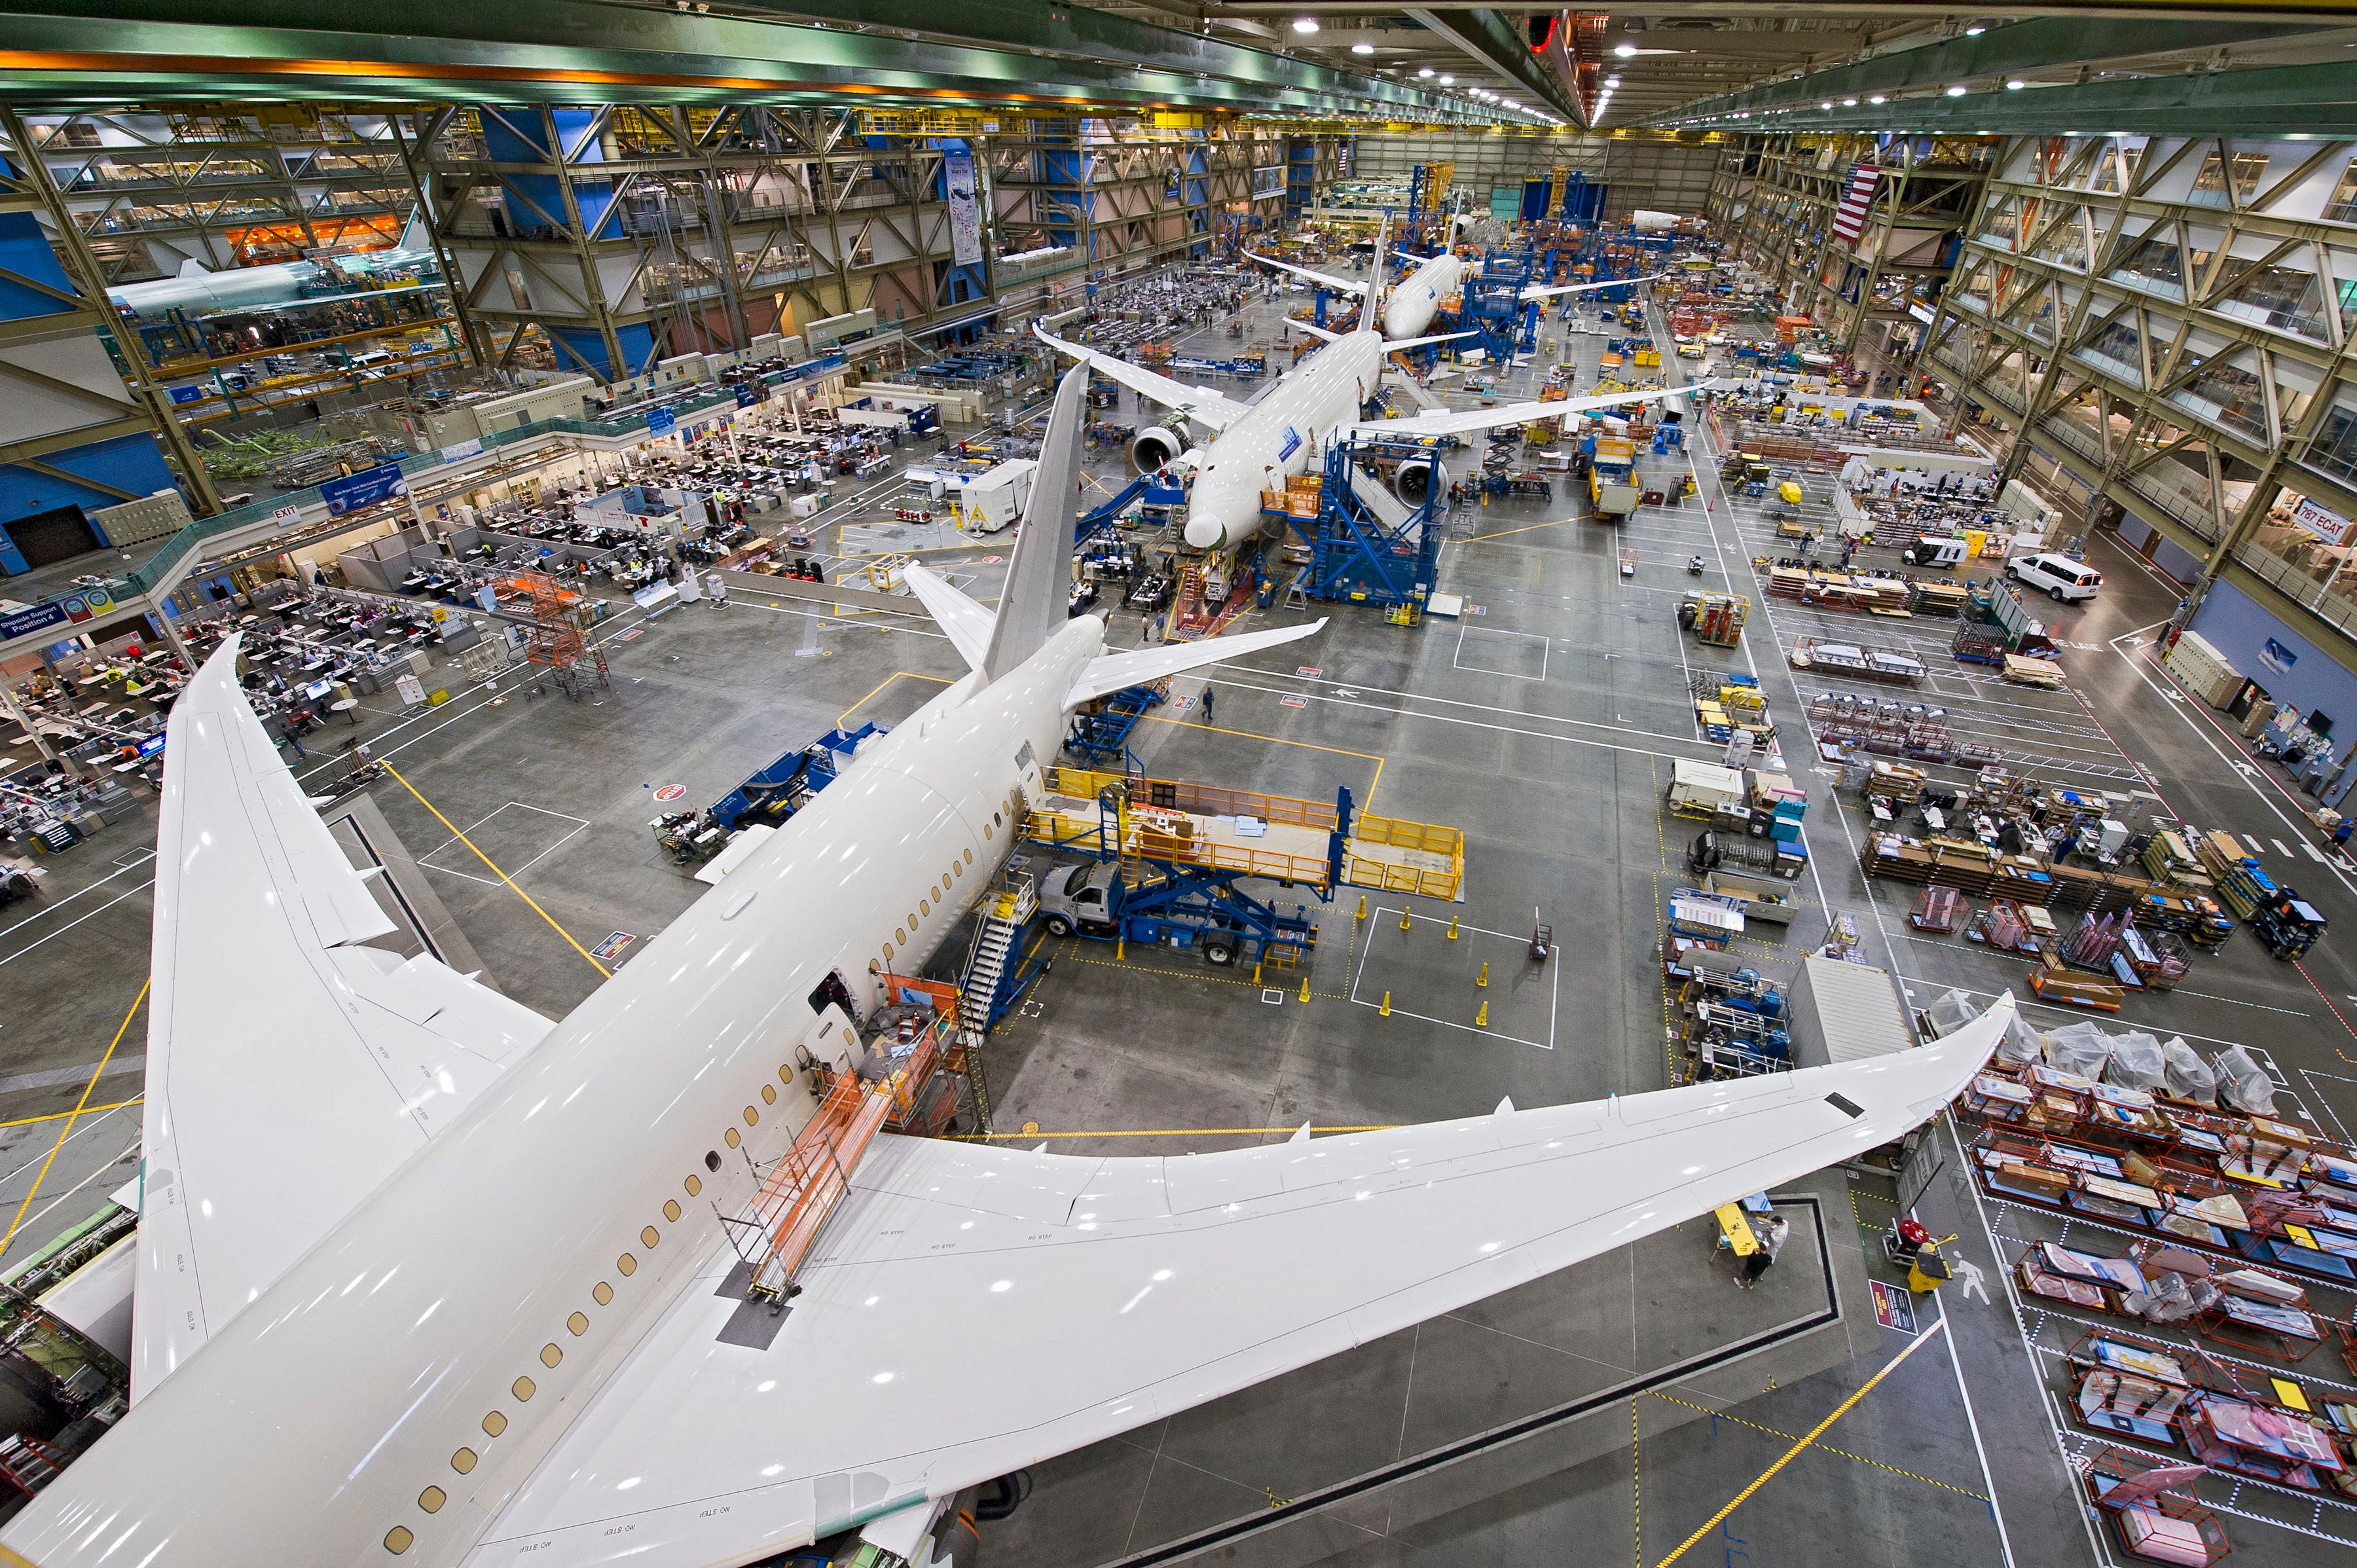 Multiple Boeing 787s in the Production facility.